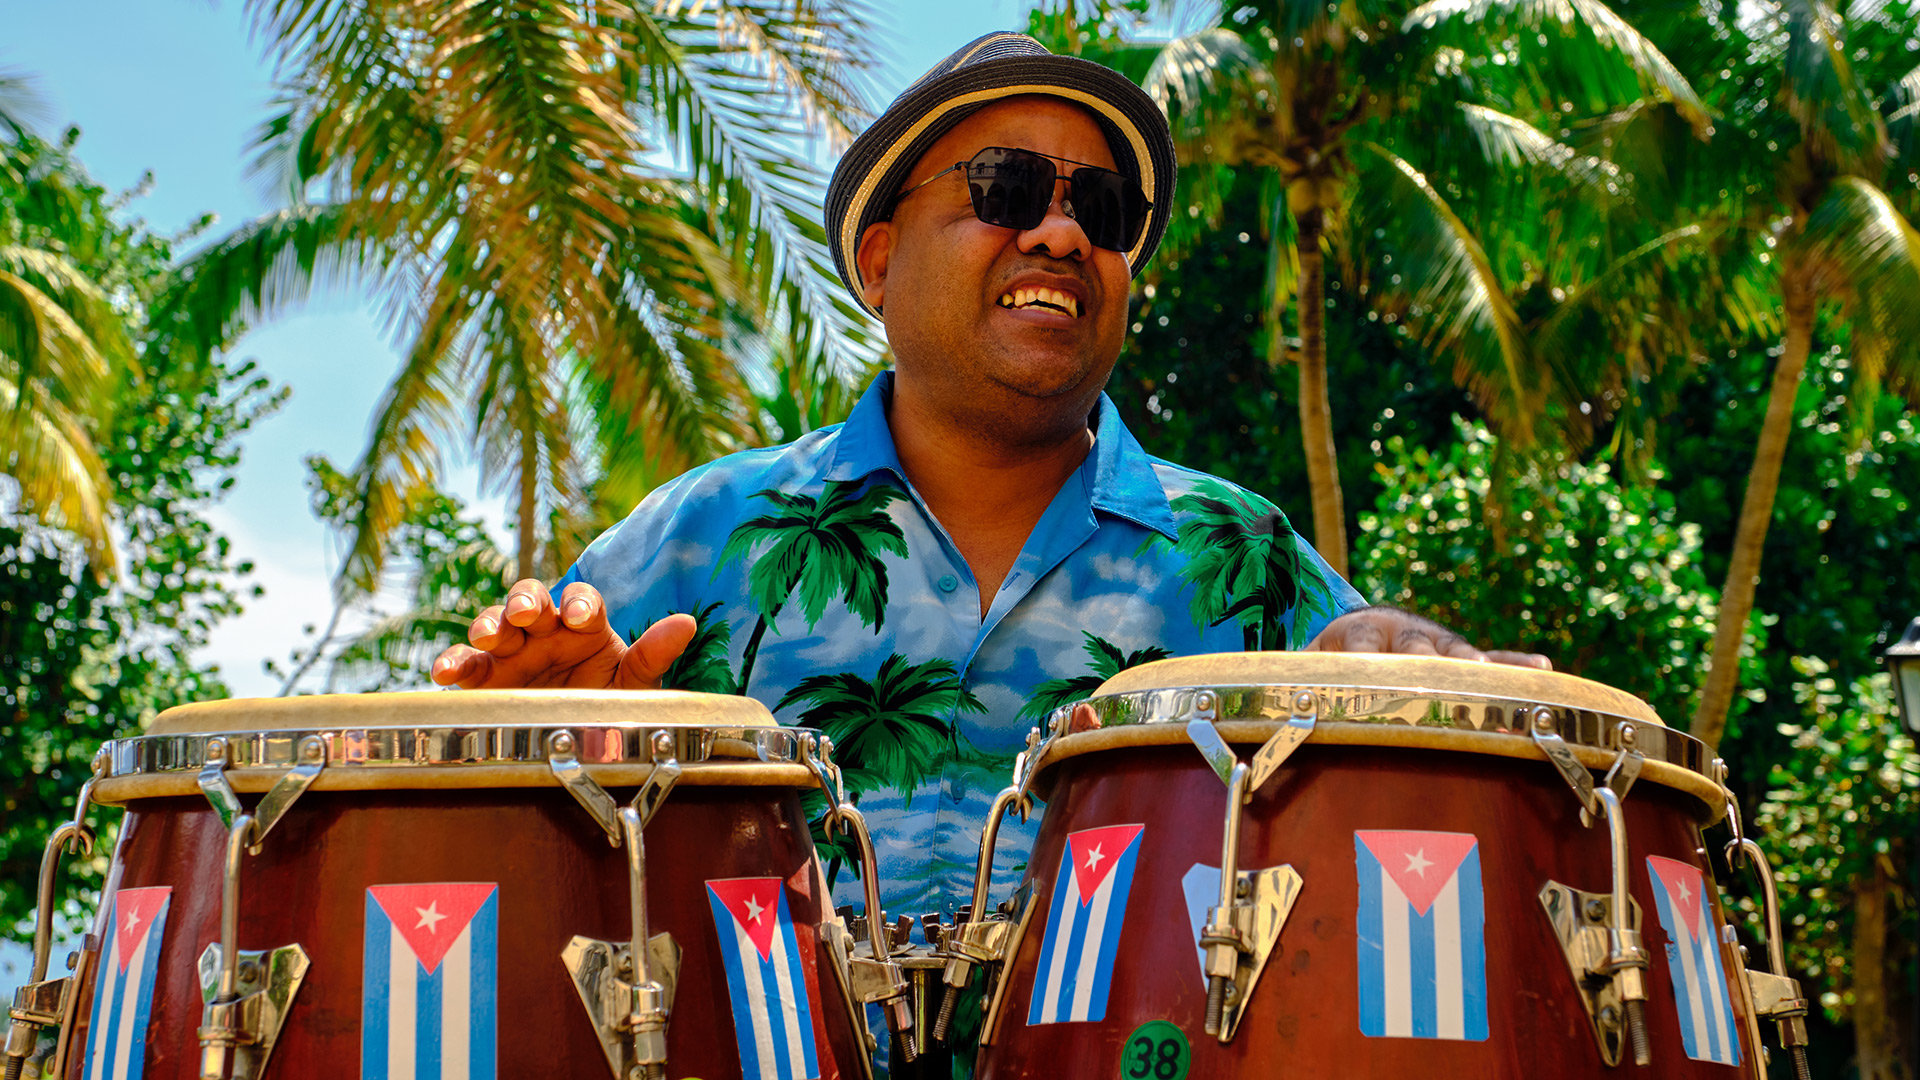 Feel the sweeping vibes and move to Cuban rhythms!